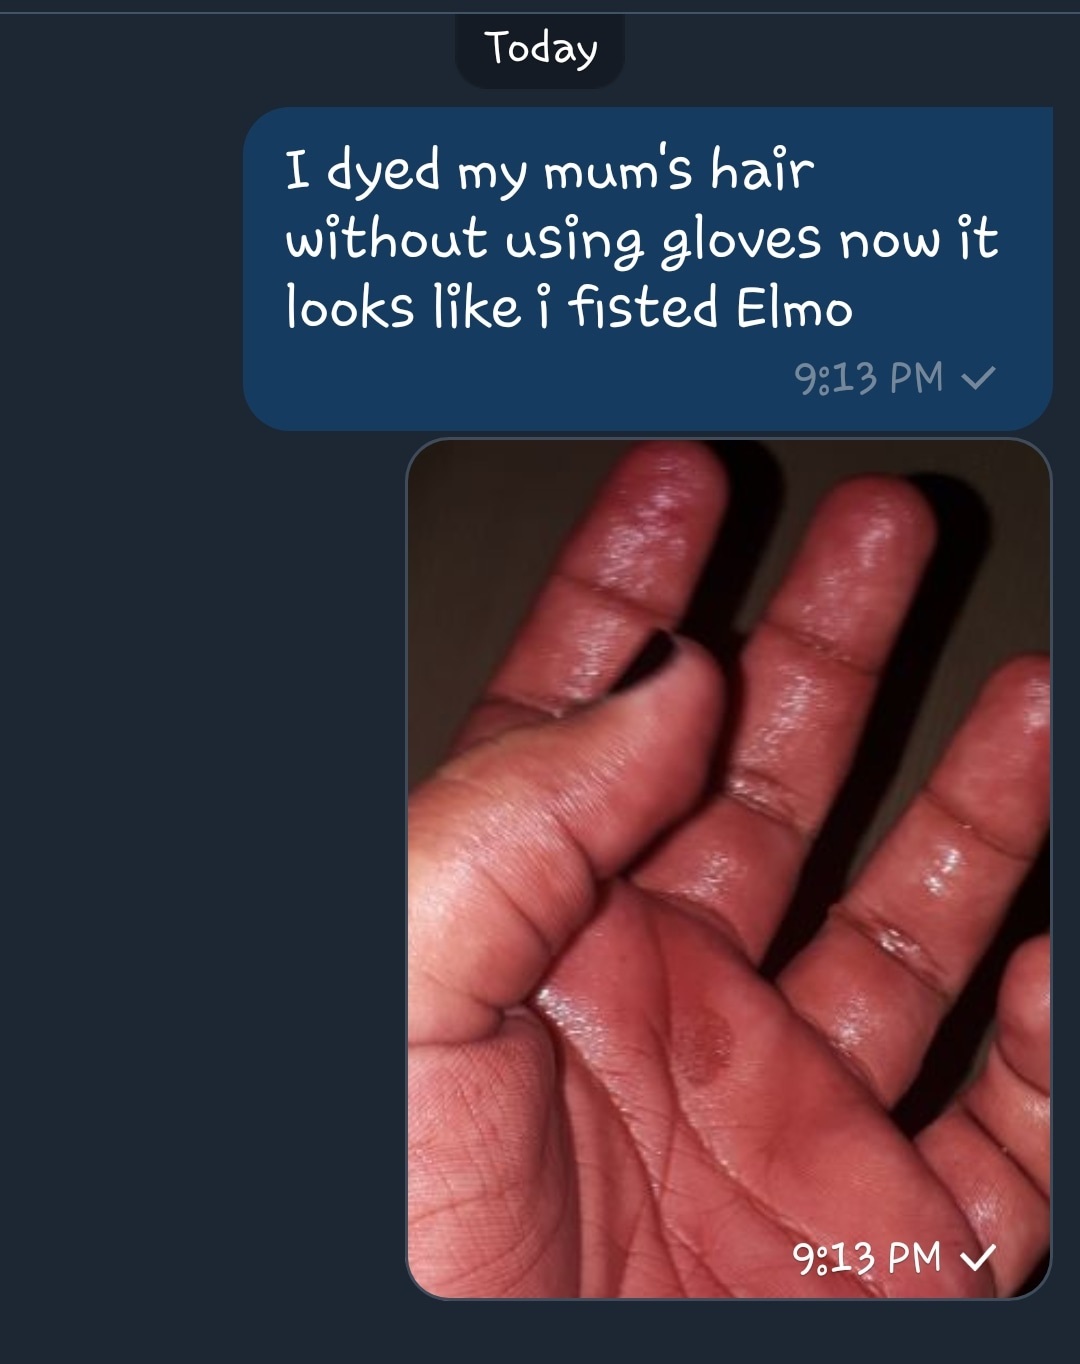 hand model - Today I dyed my mum's hair without using gloves now it looks i fisted Elmo v